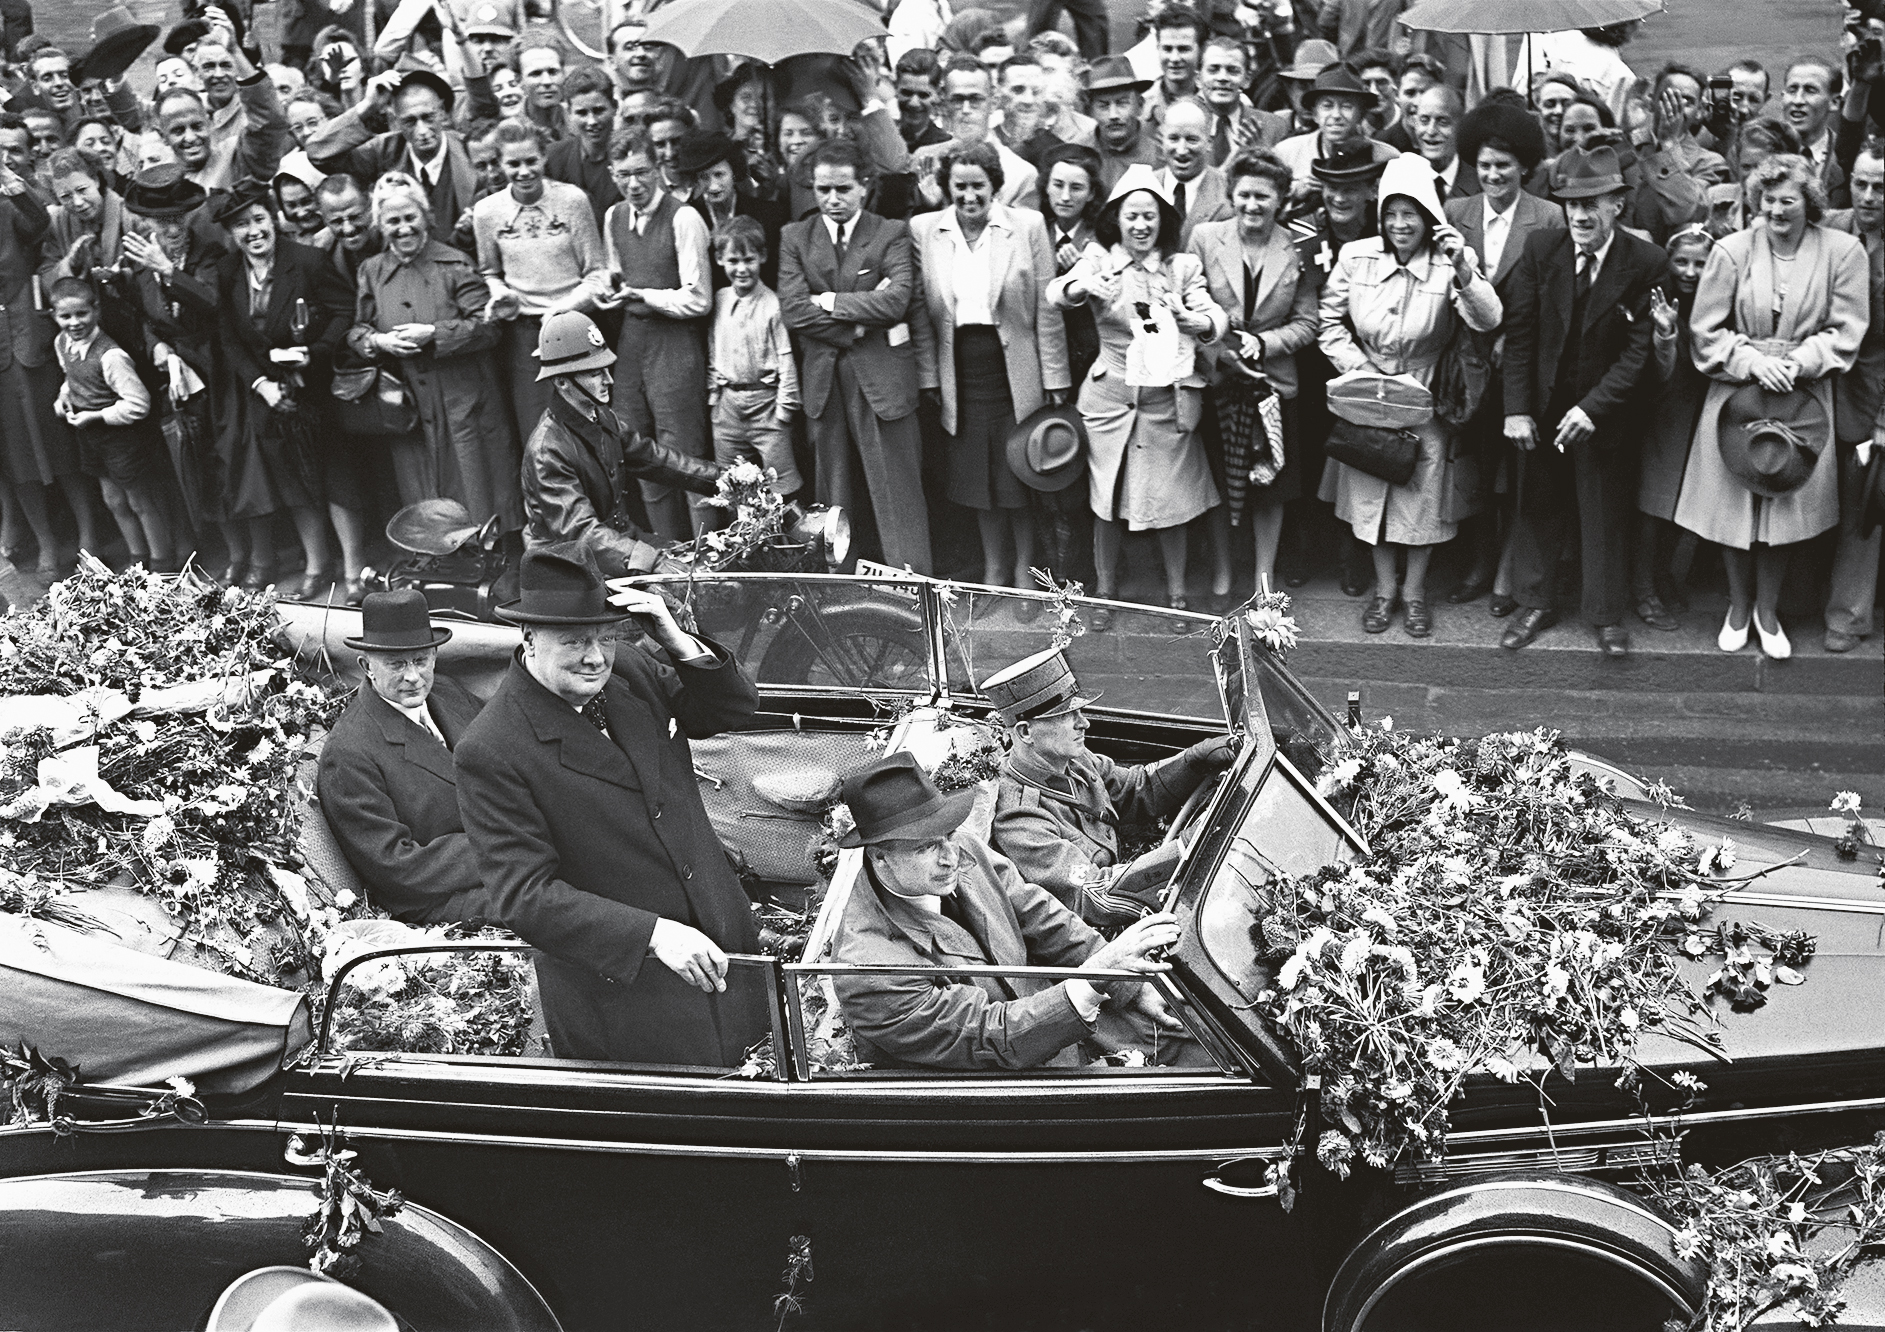 Churchill is driven past cheering crowds through the streets of Zurich